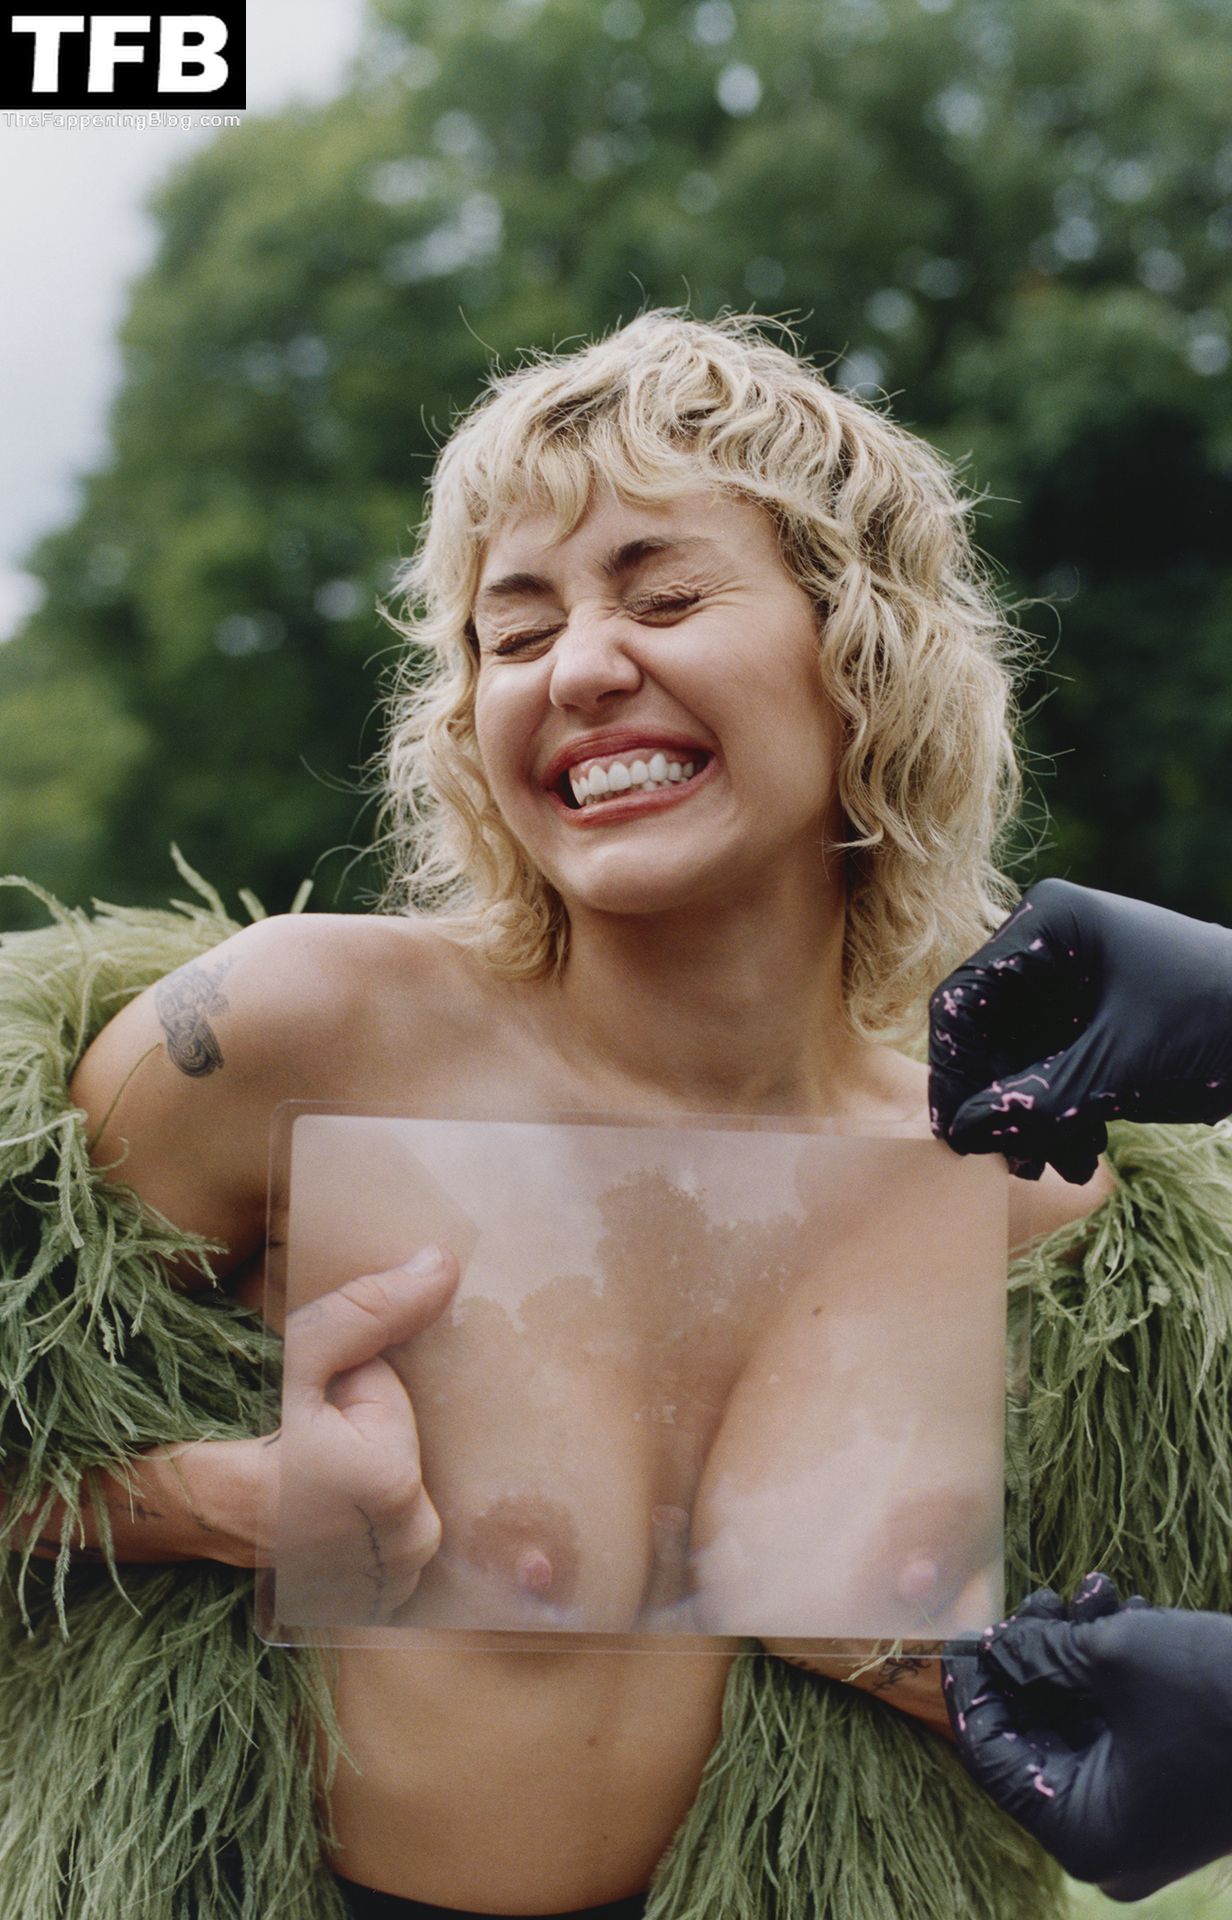 Hack miley cyrus nude photo From Miley